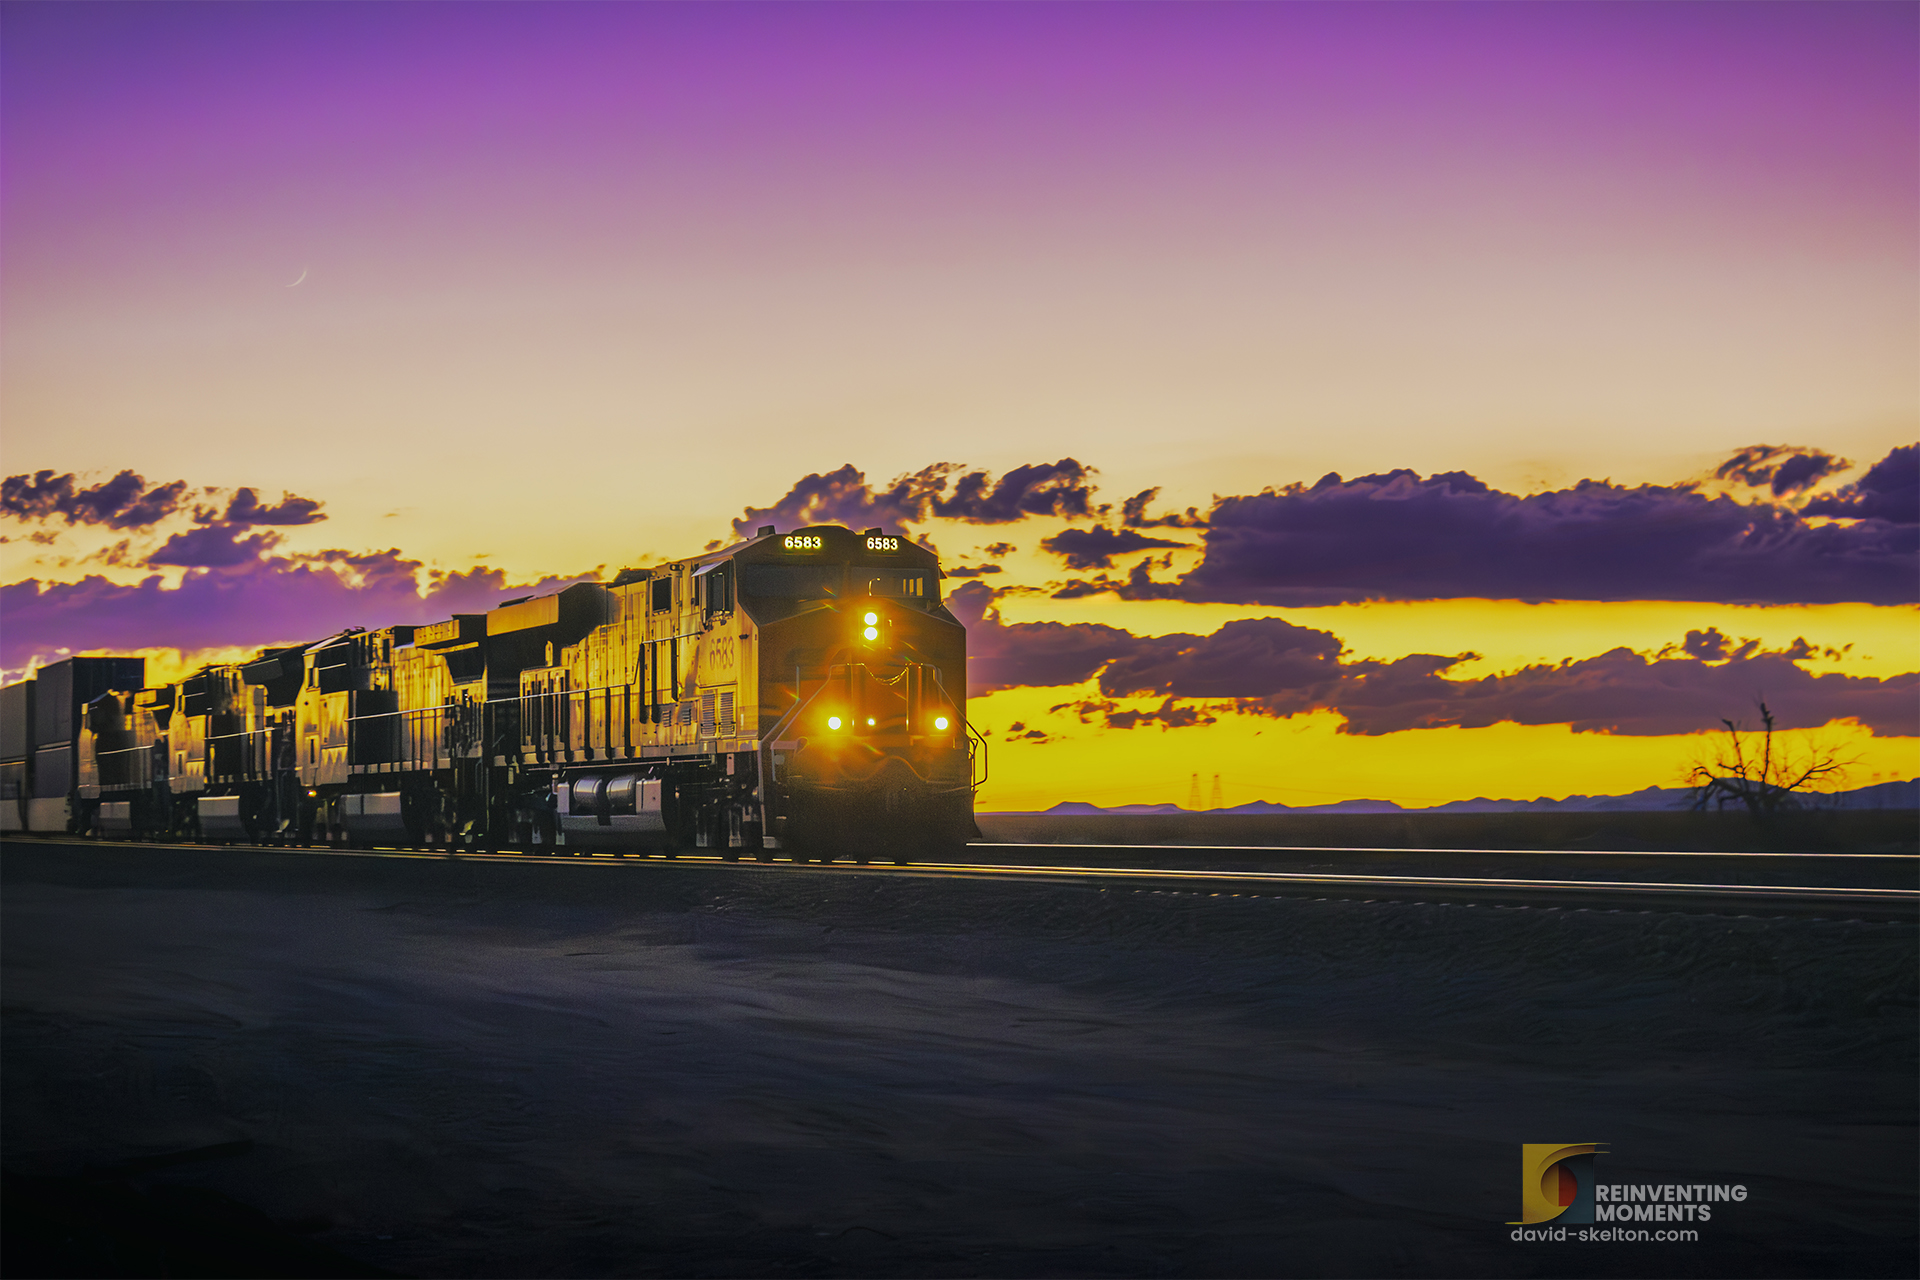 Blue Hour with BNSF 6583 on Historic Route 66 at Goffs Road, Mojave Desert - Sunset Sky